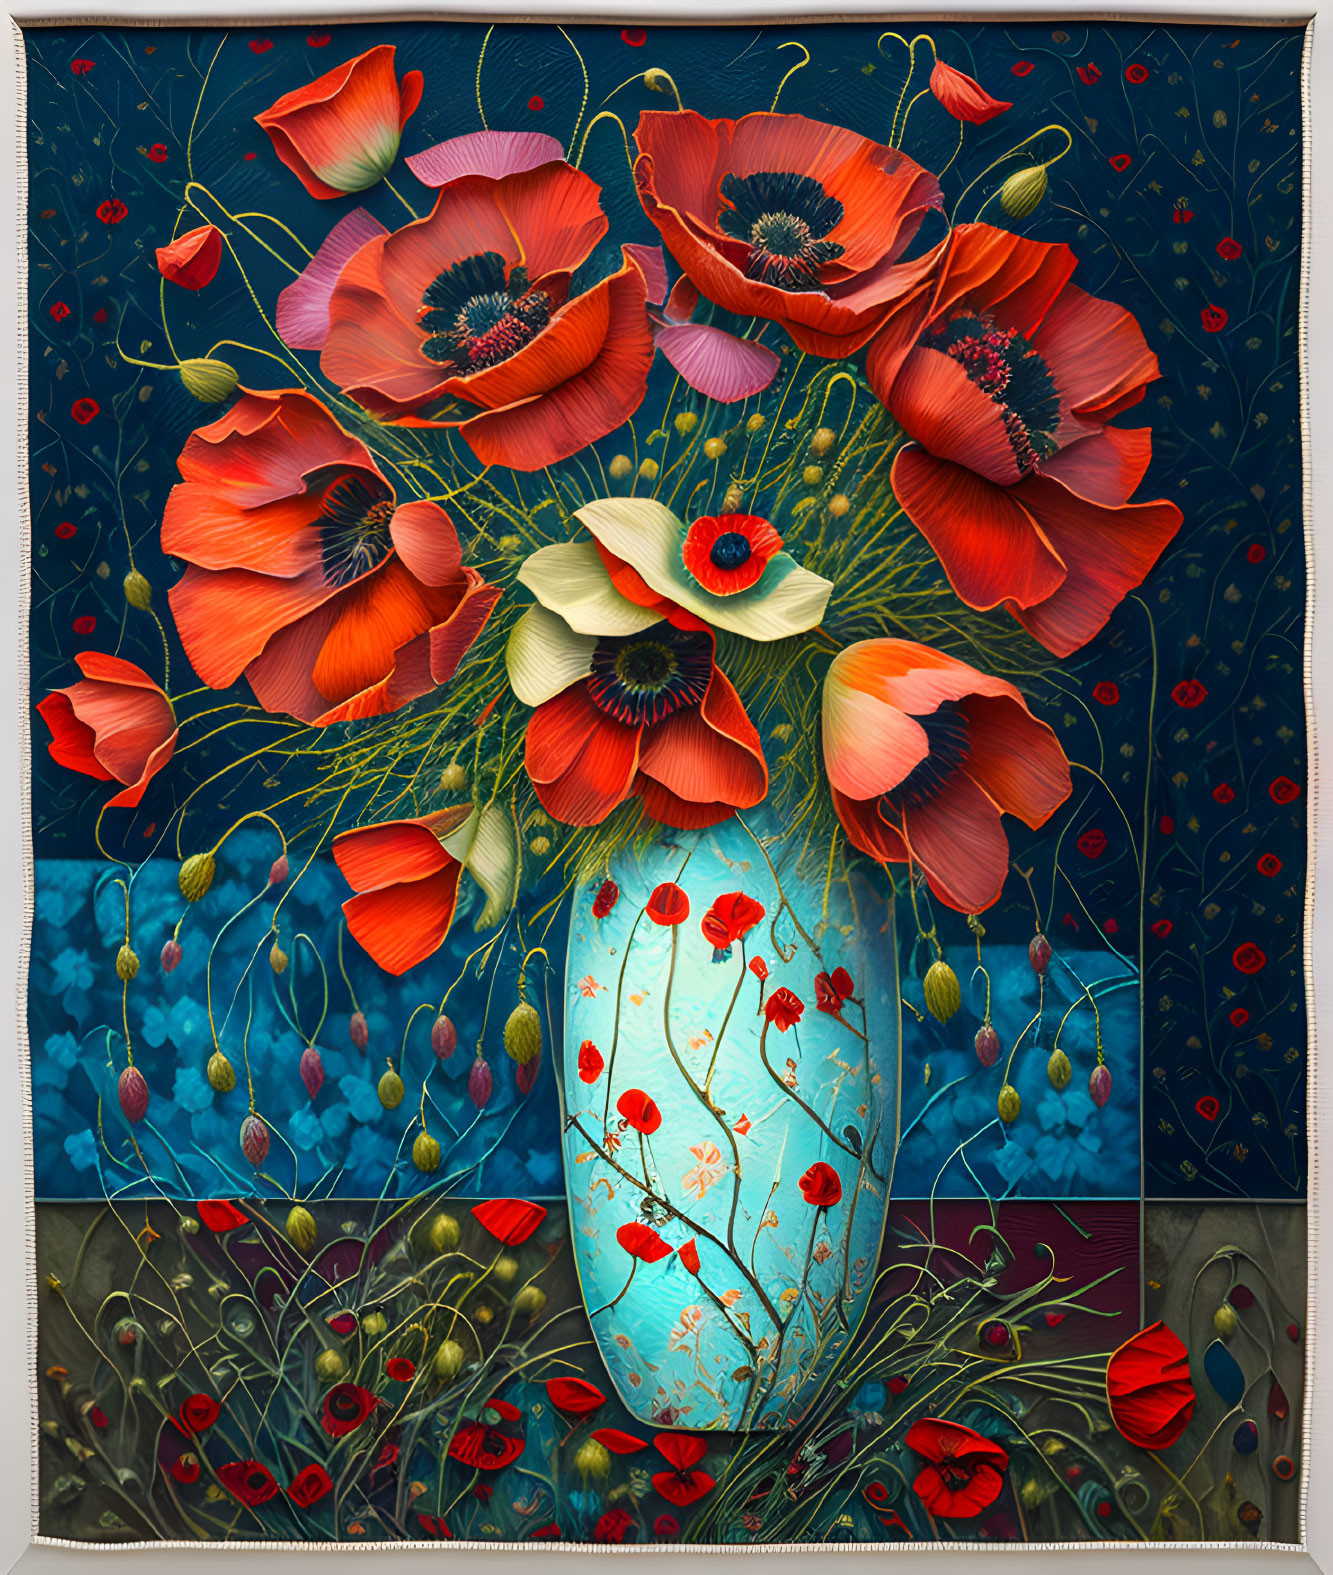 Colorful painting of blue vase with red poppies and white flowers on dark background